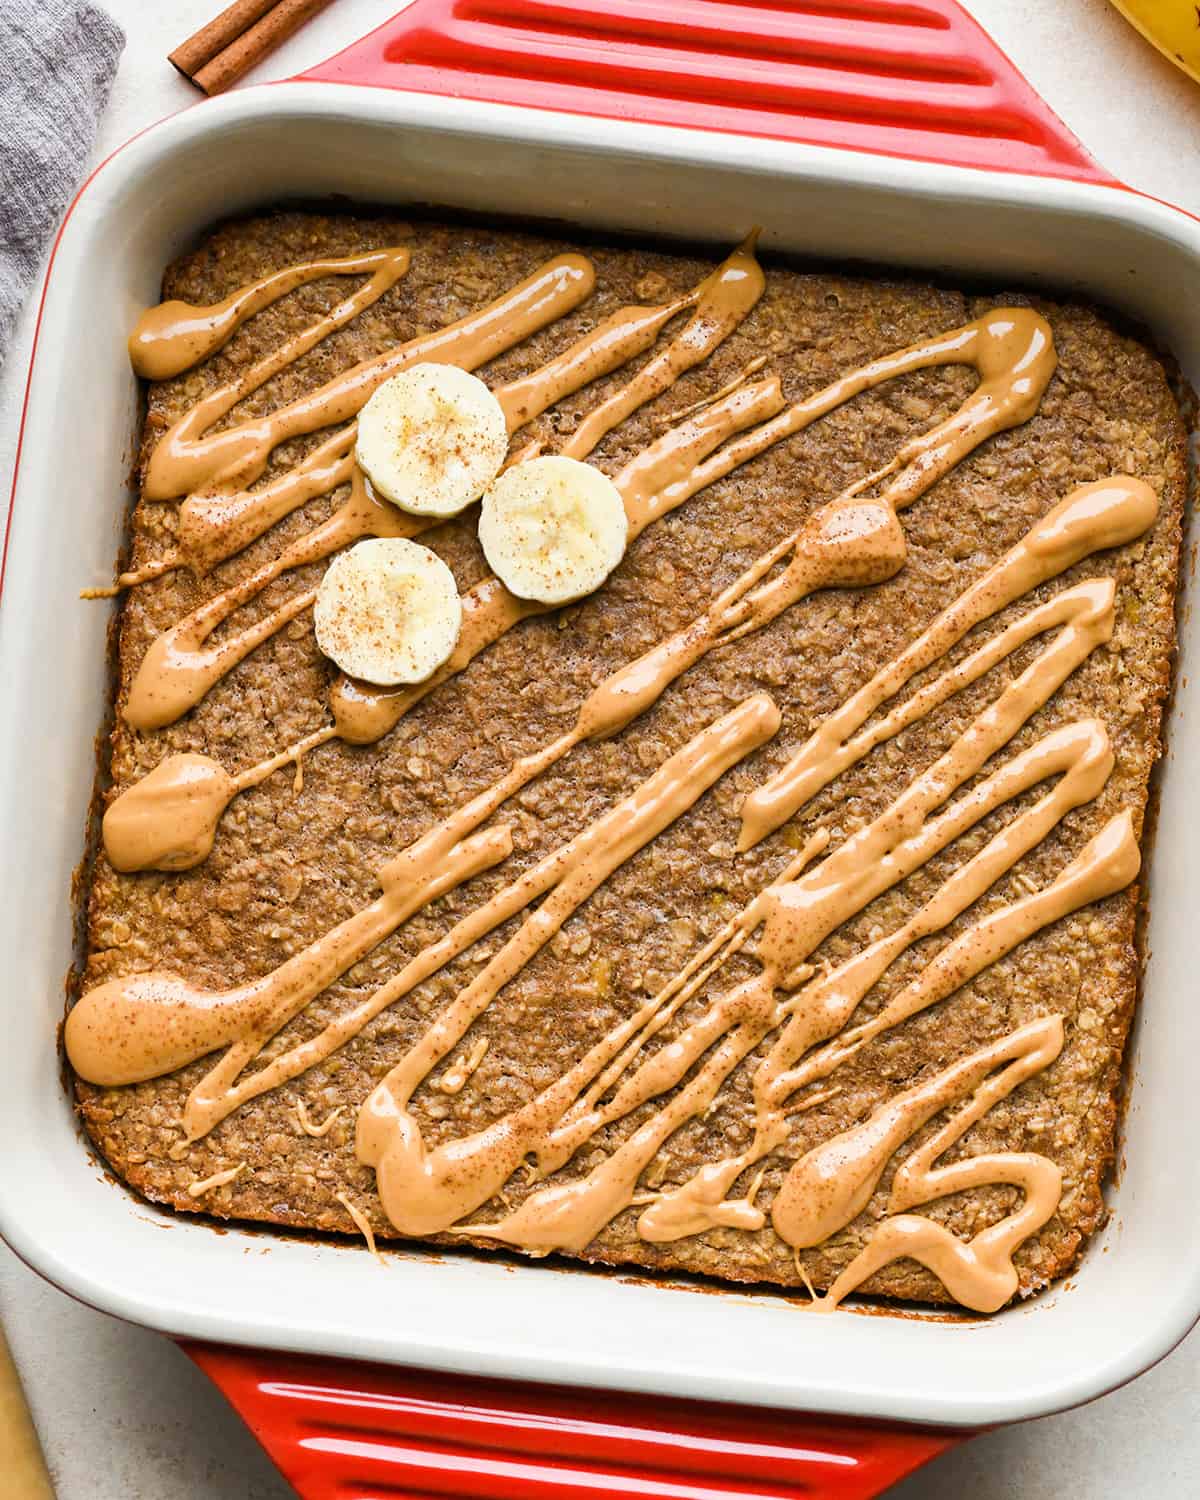 Peanut Butter Banana Baked Oatmeal in a baking dish drizzled with peanut butter, topped with sliced bananas and cinnamon